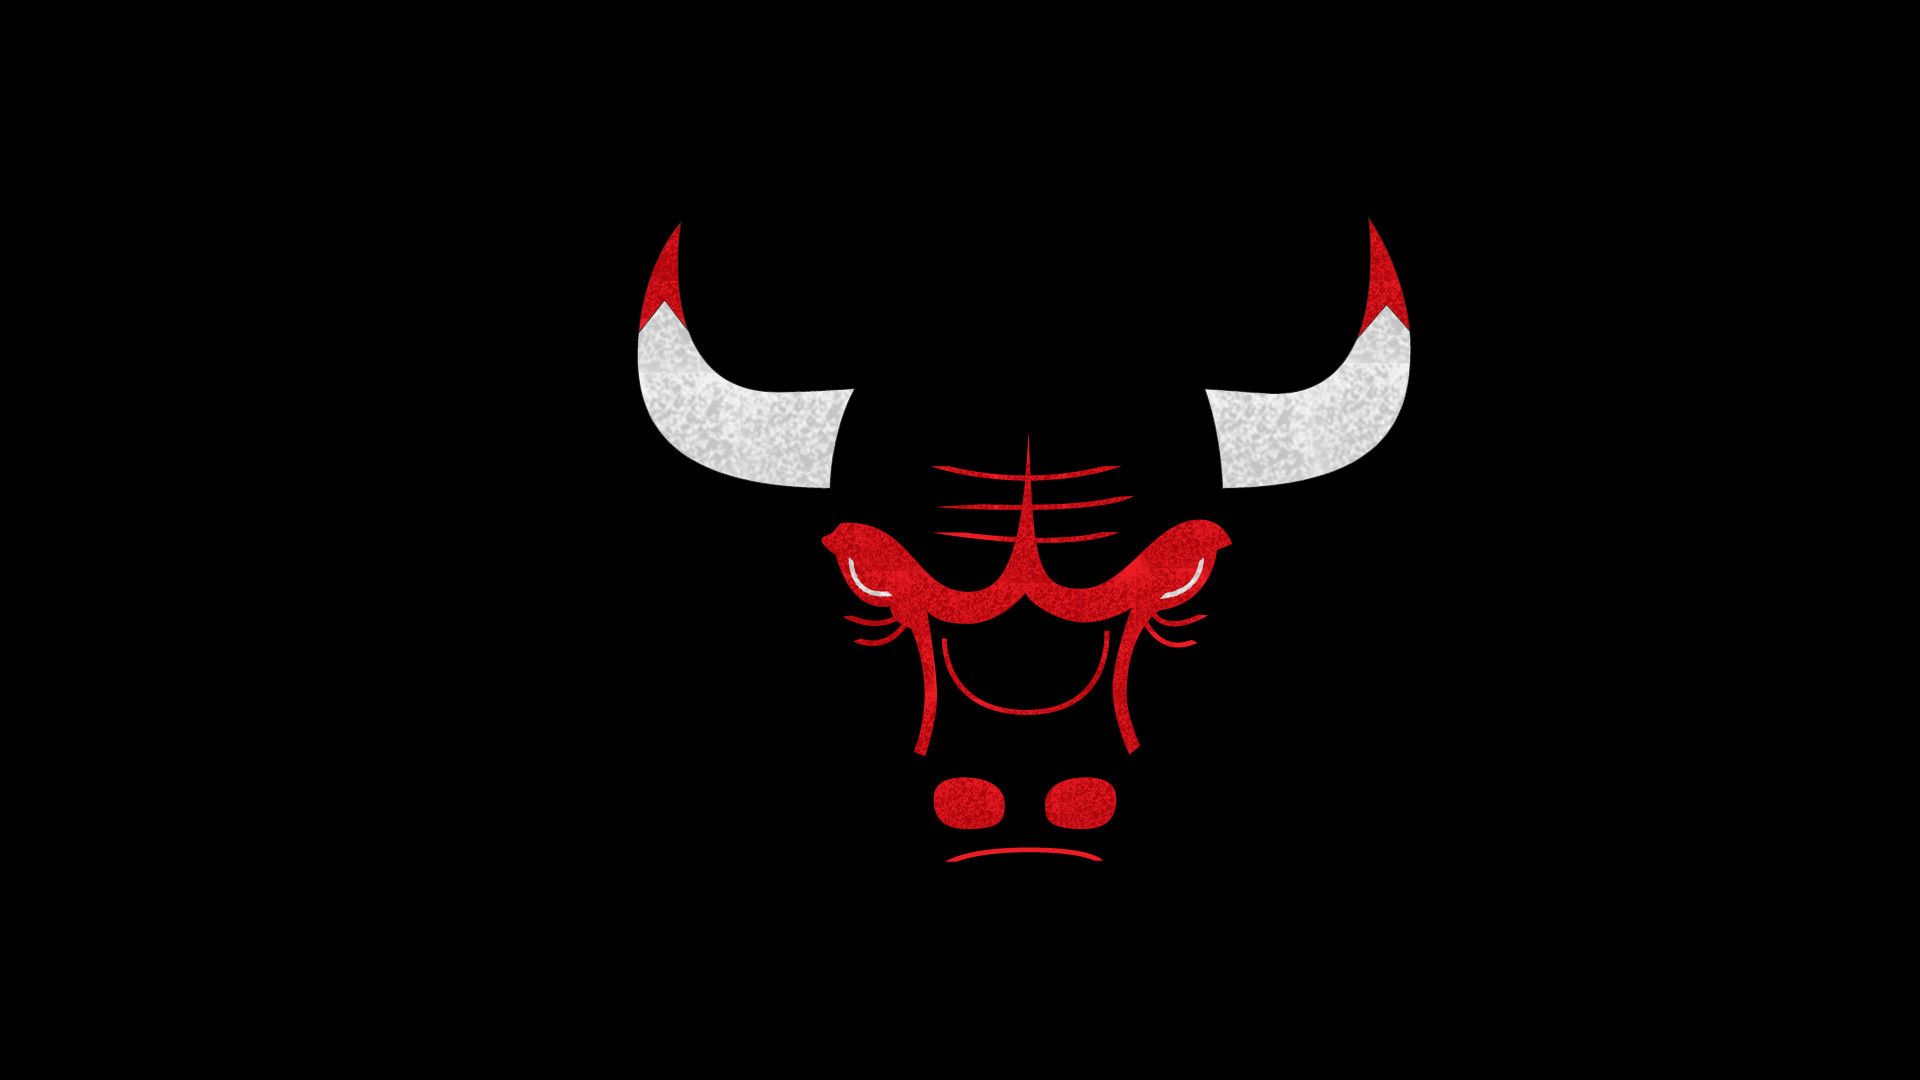 The bulls logo on a black background - Chicago